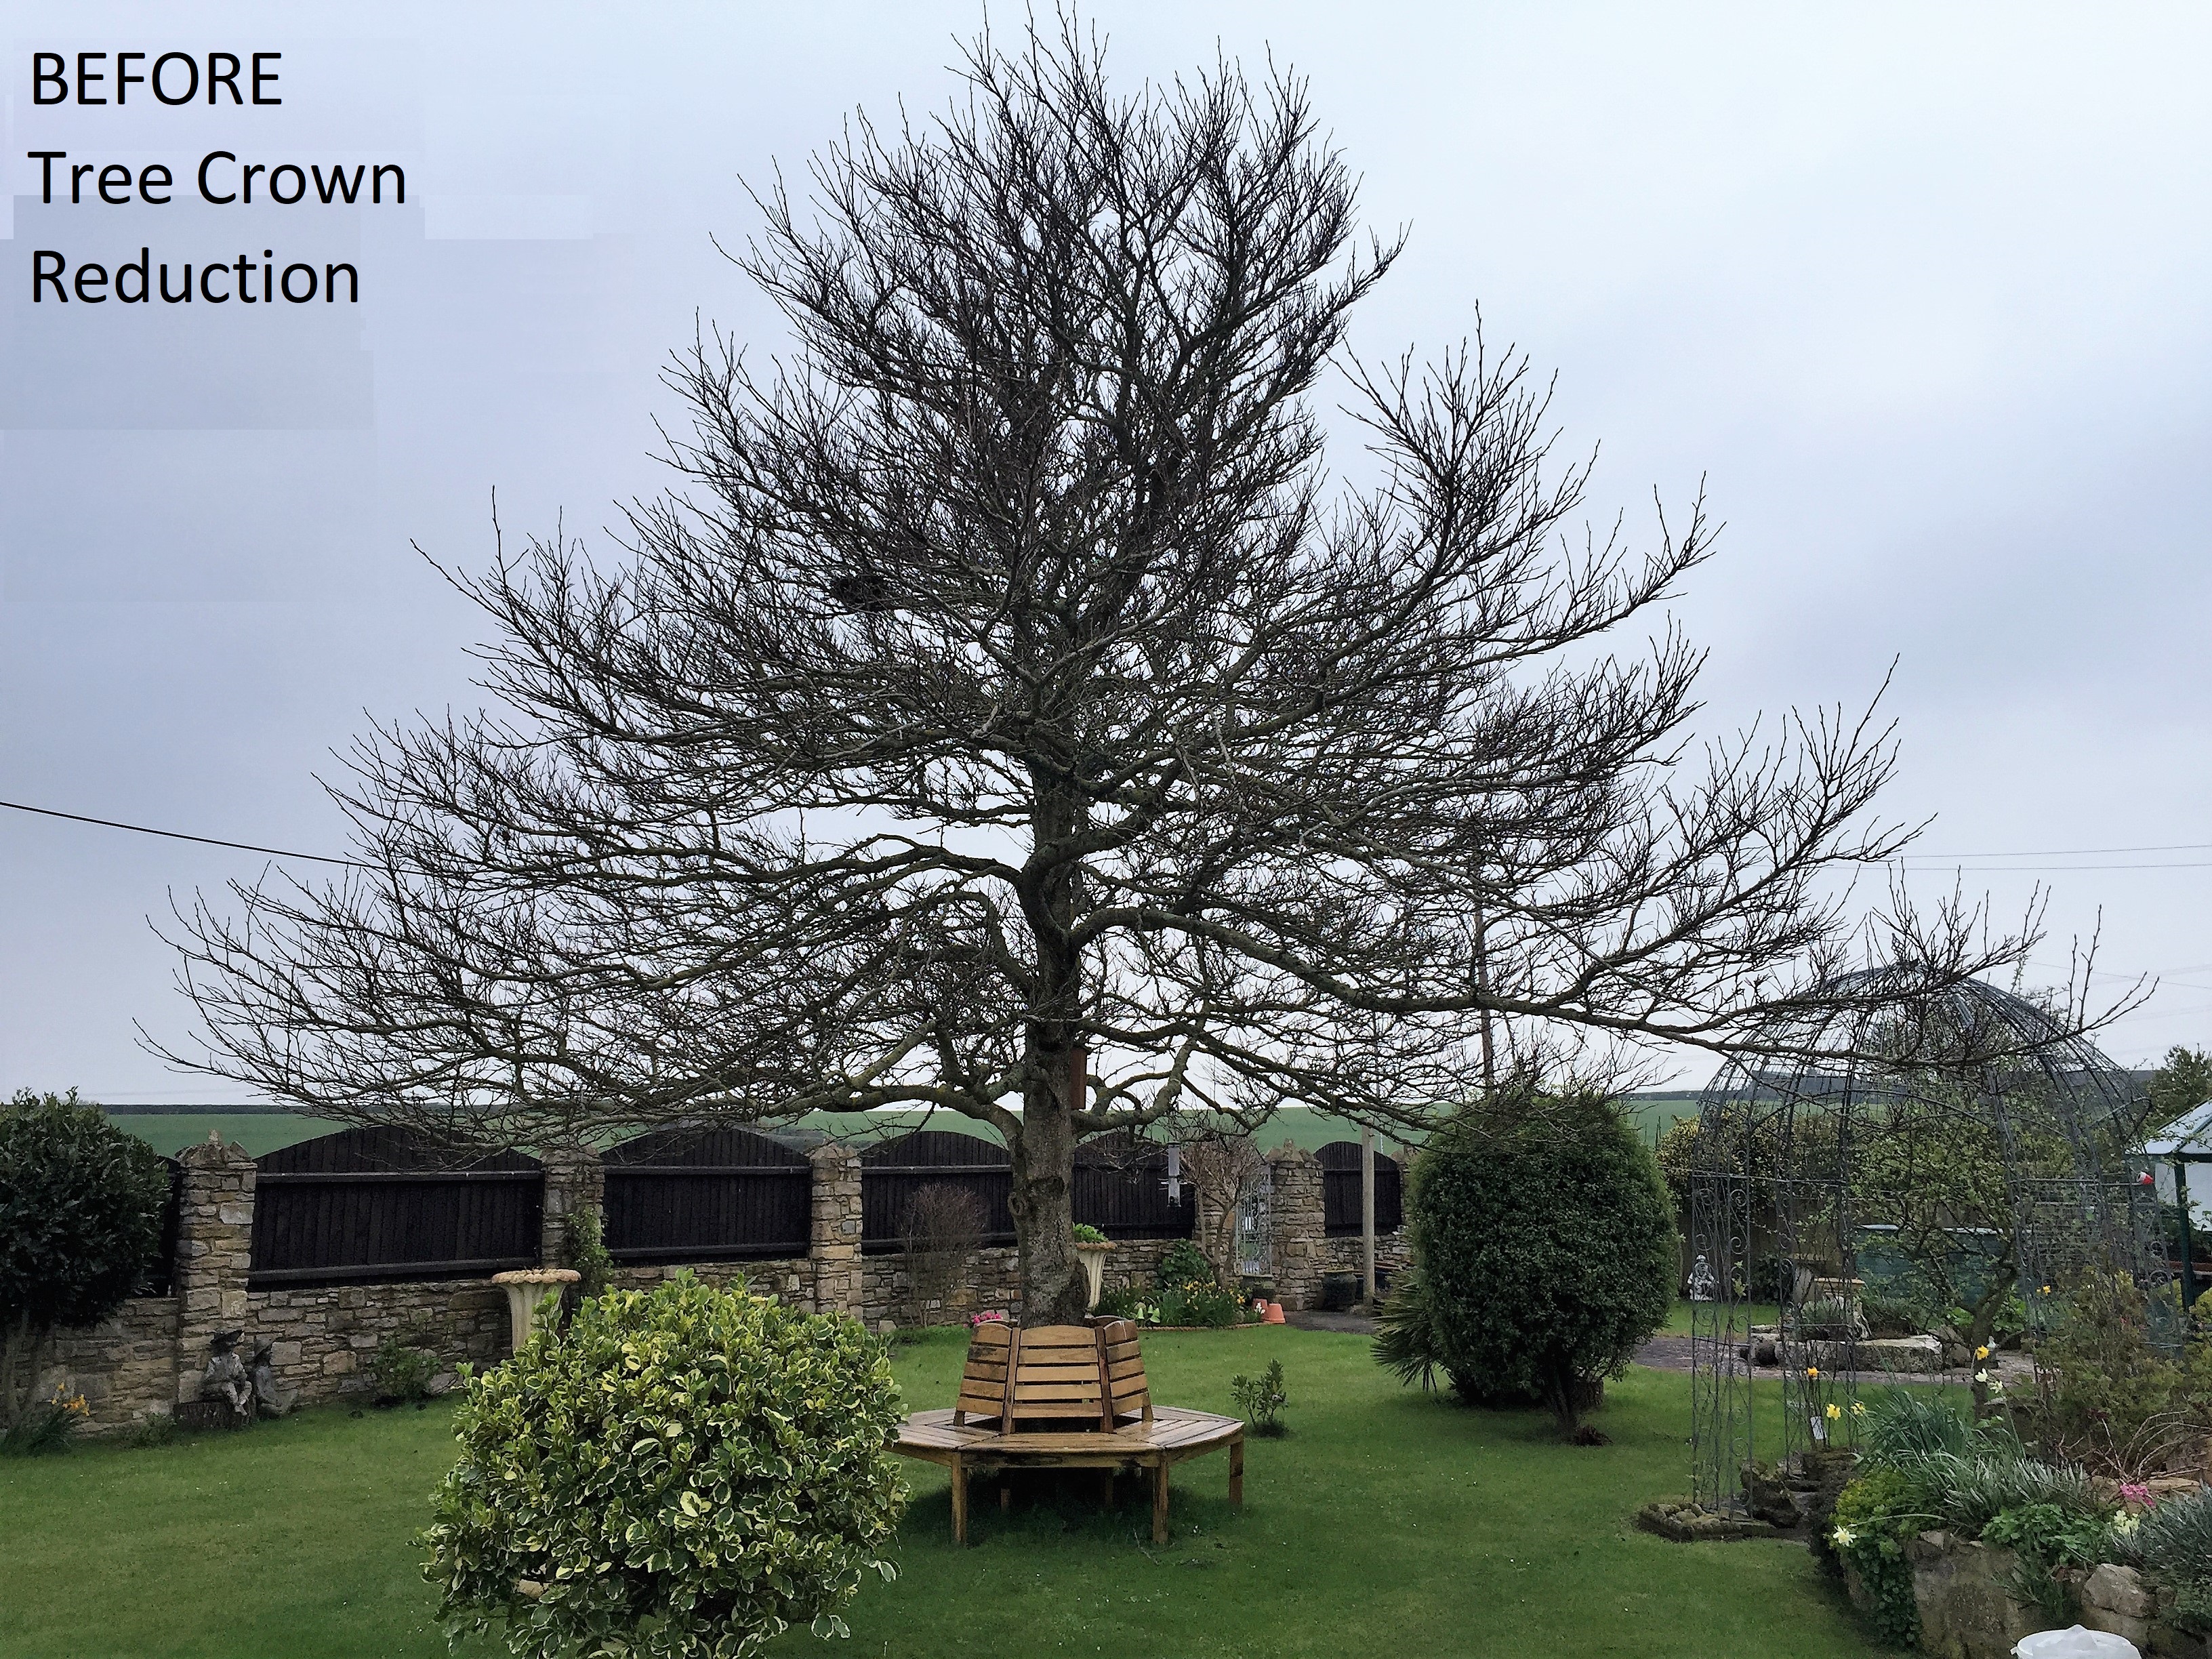 Weymouth Tree Surgeon | Tree Care & Hedge Trimming, Stump Removal in Weymouth, Dorchester, Portland in Dorset.